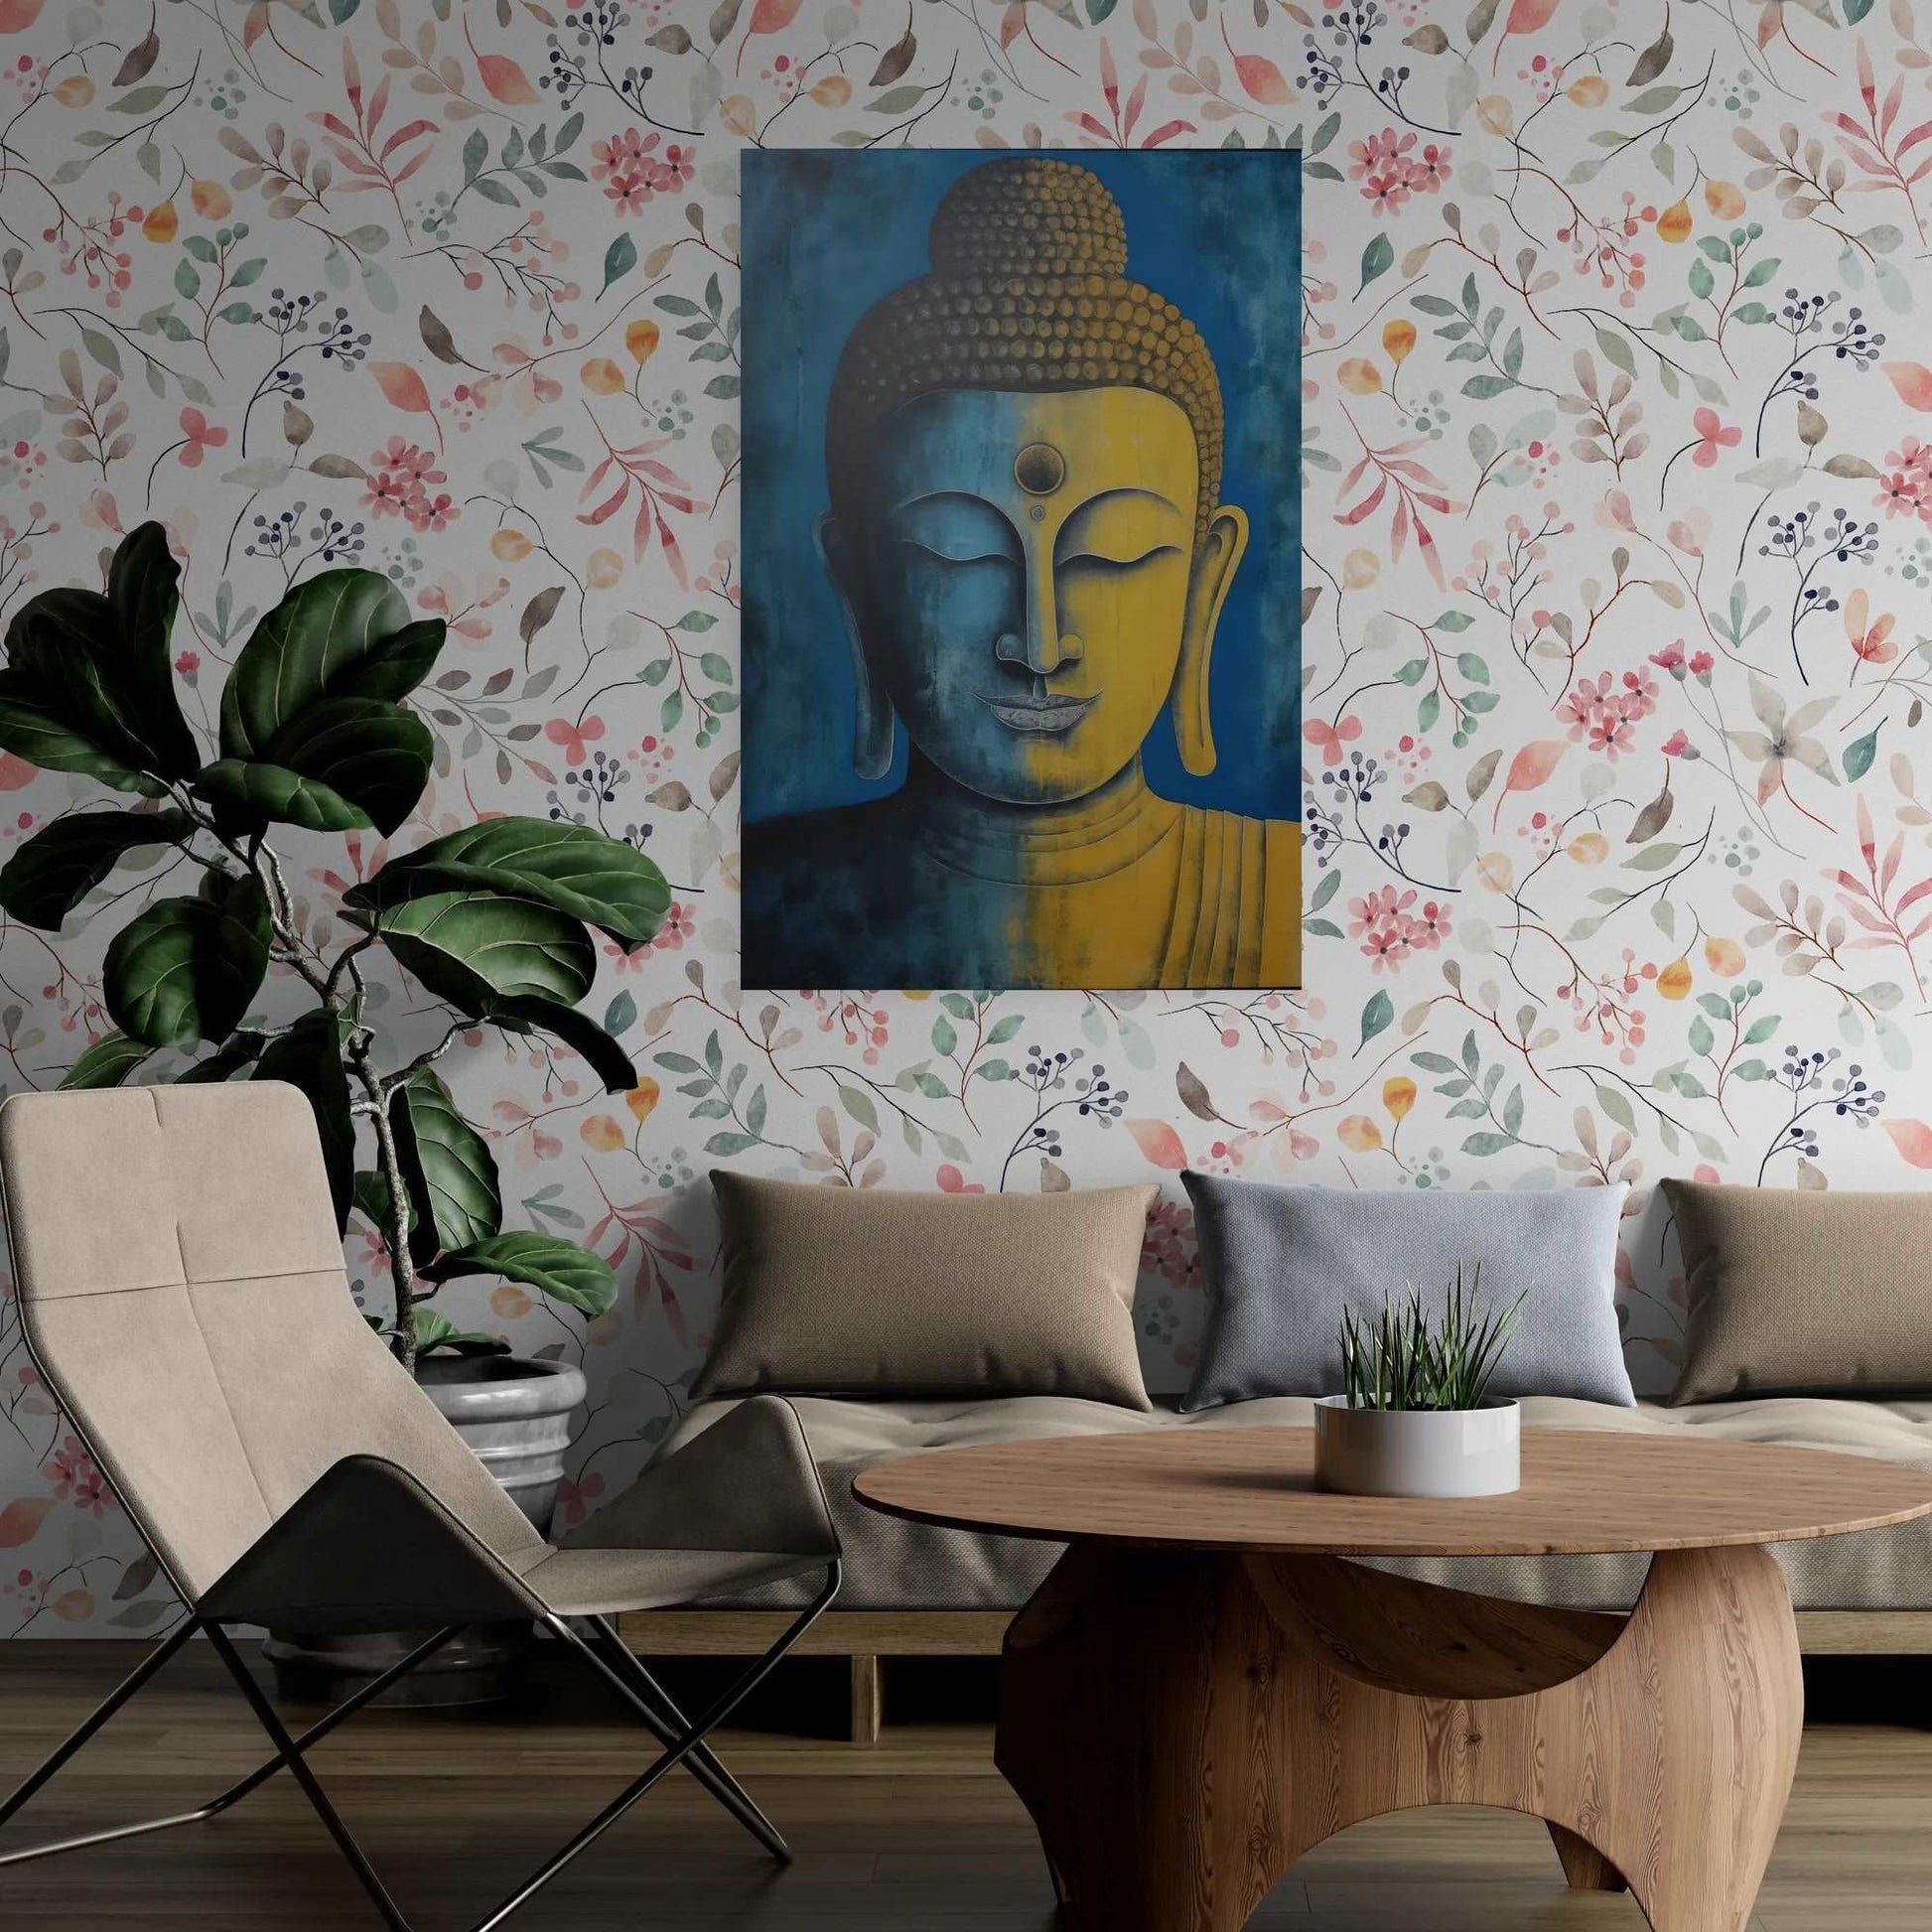 Modern living space with a blue and gold Buddha painting against a colorful floral wallpaper, accompanied by a fiddle-leaf fig plant and minimalist furniture.